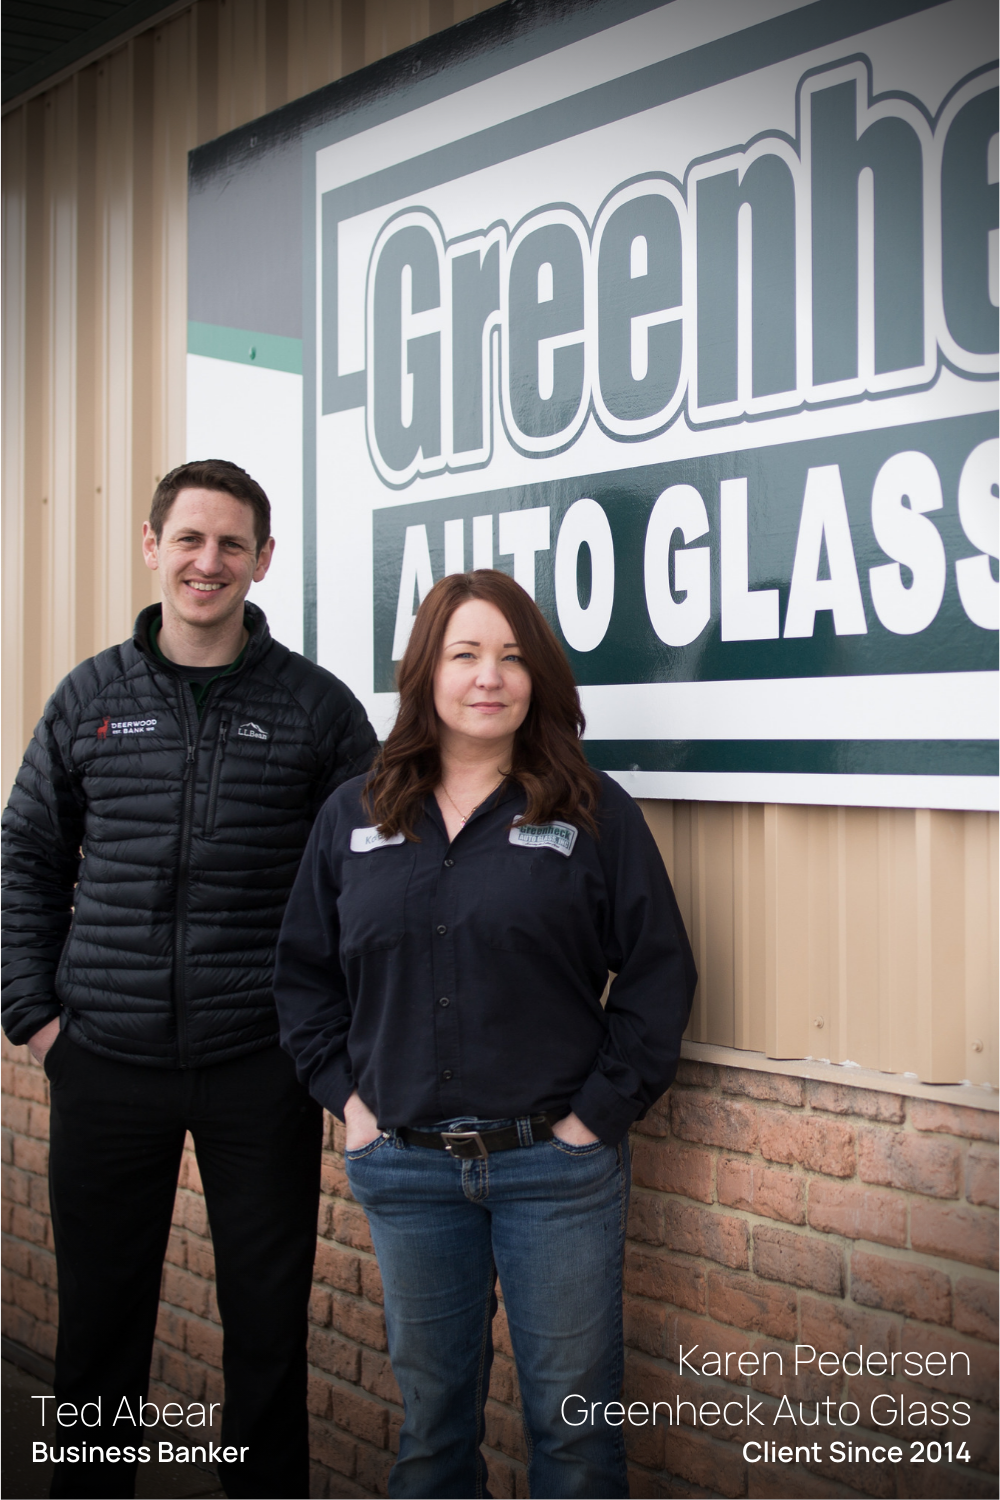 Greenheck Auto Glass client and Deerwood Bank Employee